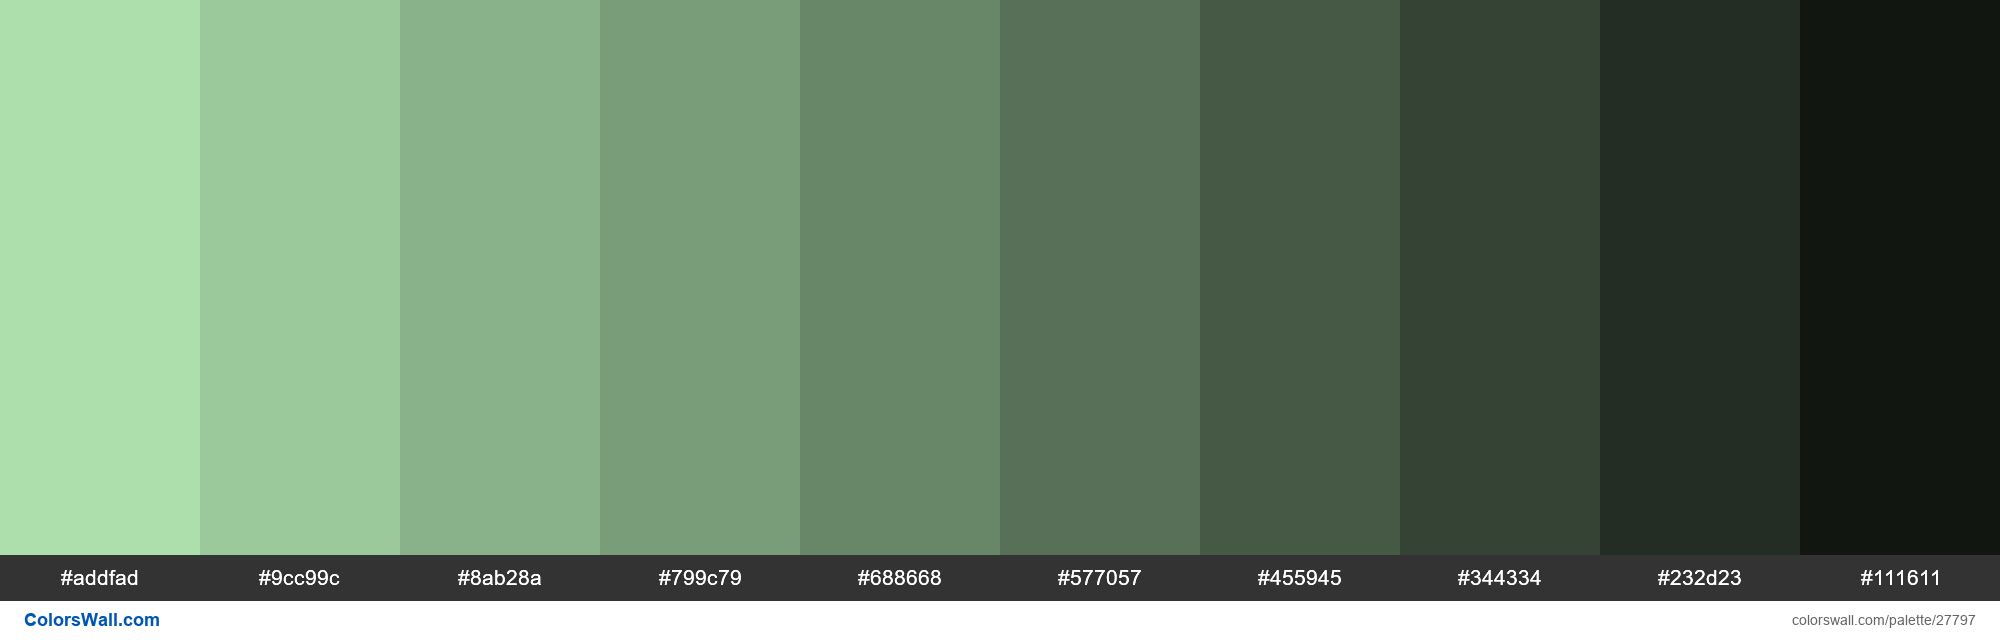 crecer Insignificante pelo Shades of Moss Green color #ADDFAD hex - ColorsWall